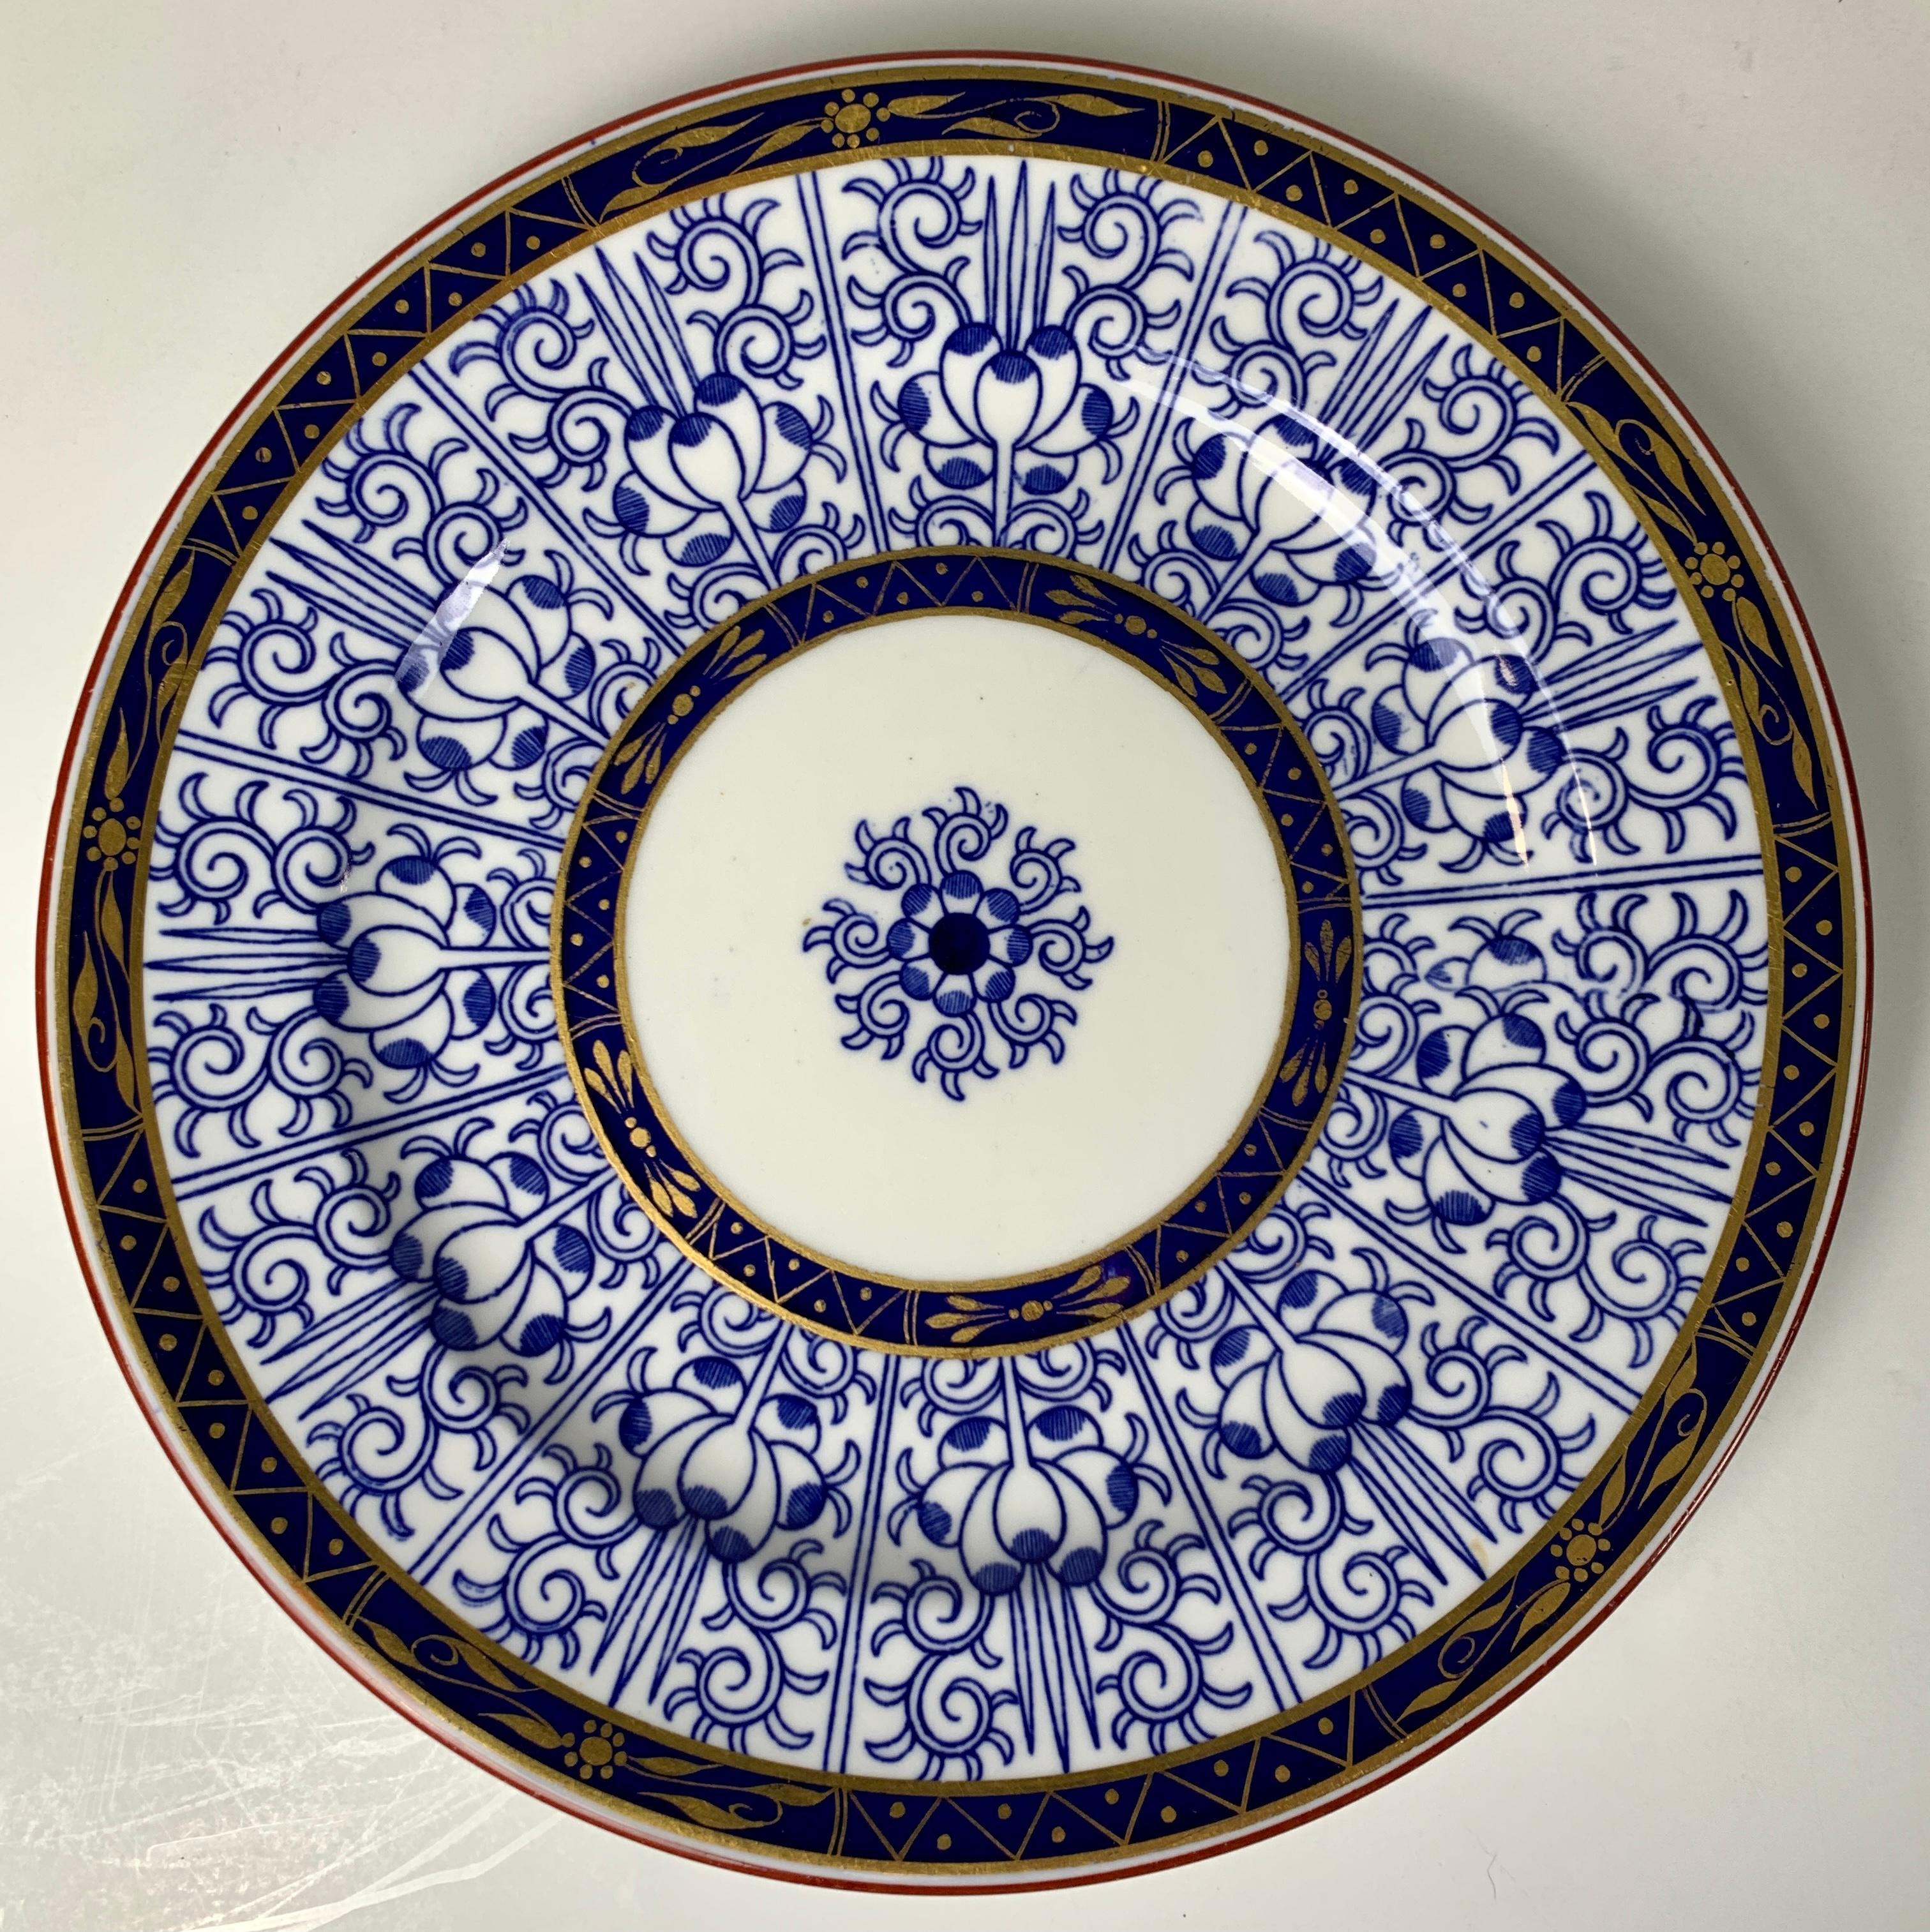 This exceptional blue and white set of Royal Lily Pattern dinner dishes was made in England in 1877.
The dozen dinner plates are beautifully painted in underglaze blue in the exquisite Worcester 